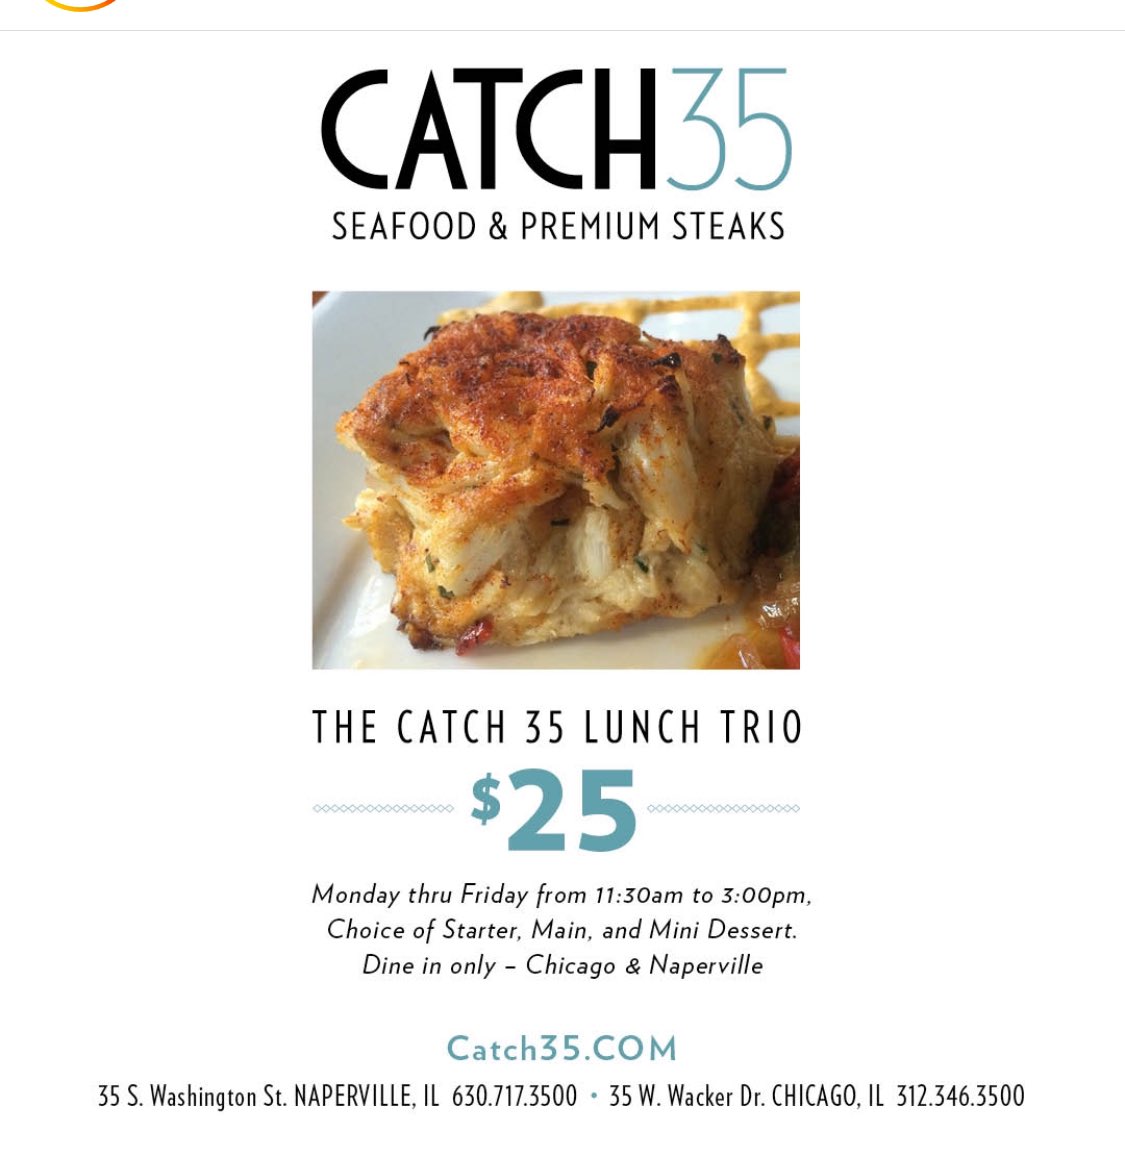 Book now at catch35.com #lunchtrio #lunchspecial #choosechicago #dinenaperville #downtown_naperville